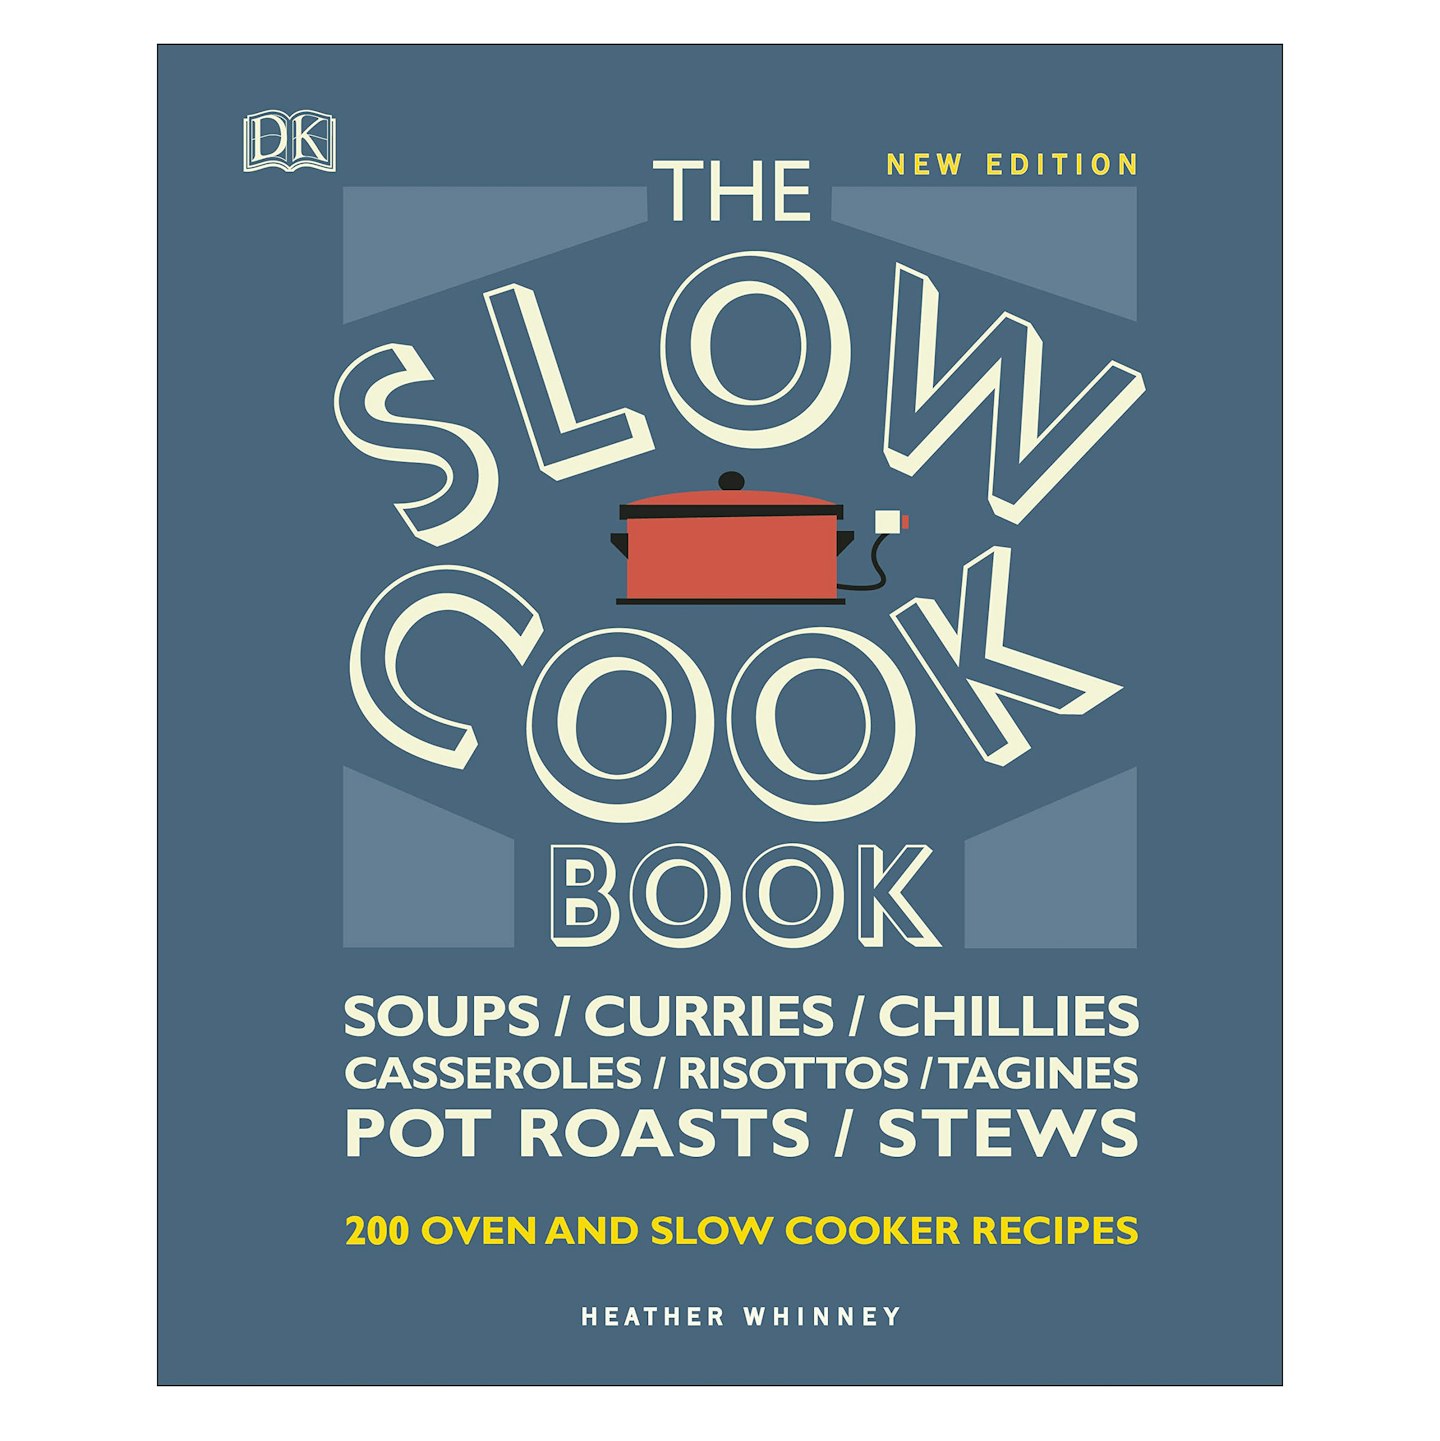 The Slow Cook Book: Over 200 Oven and Slow Cooker Recipes by Heather Whinney